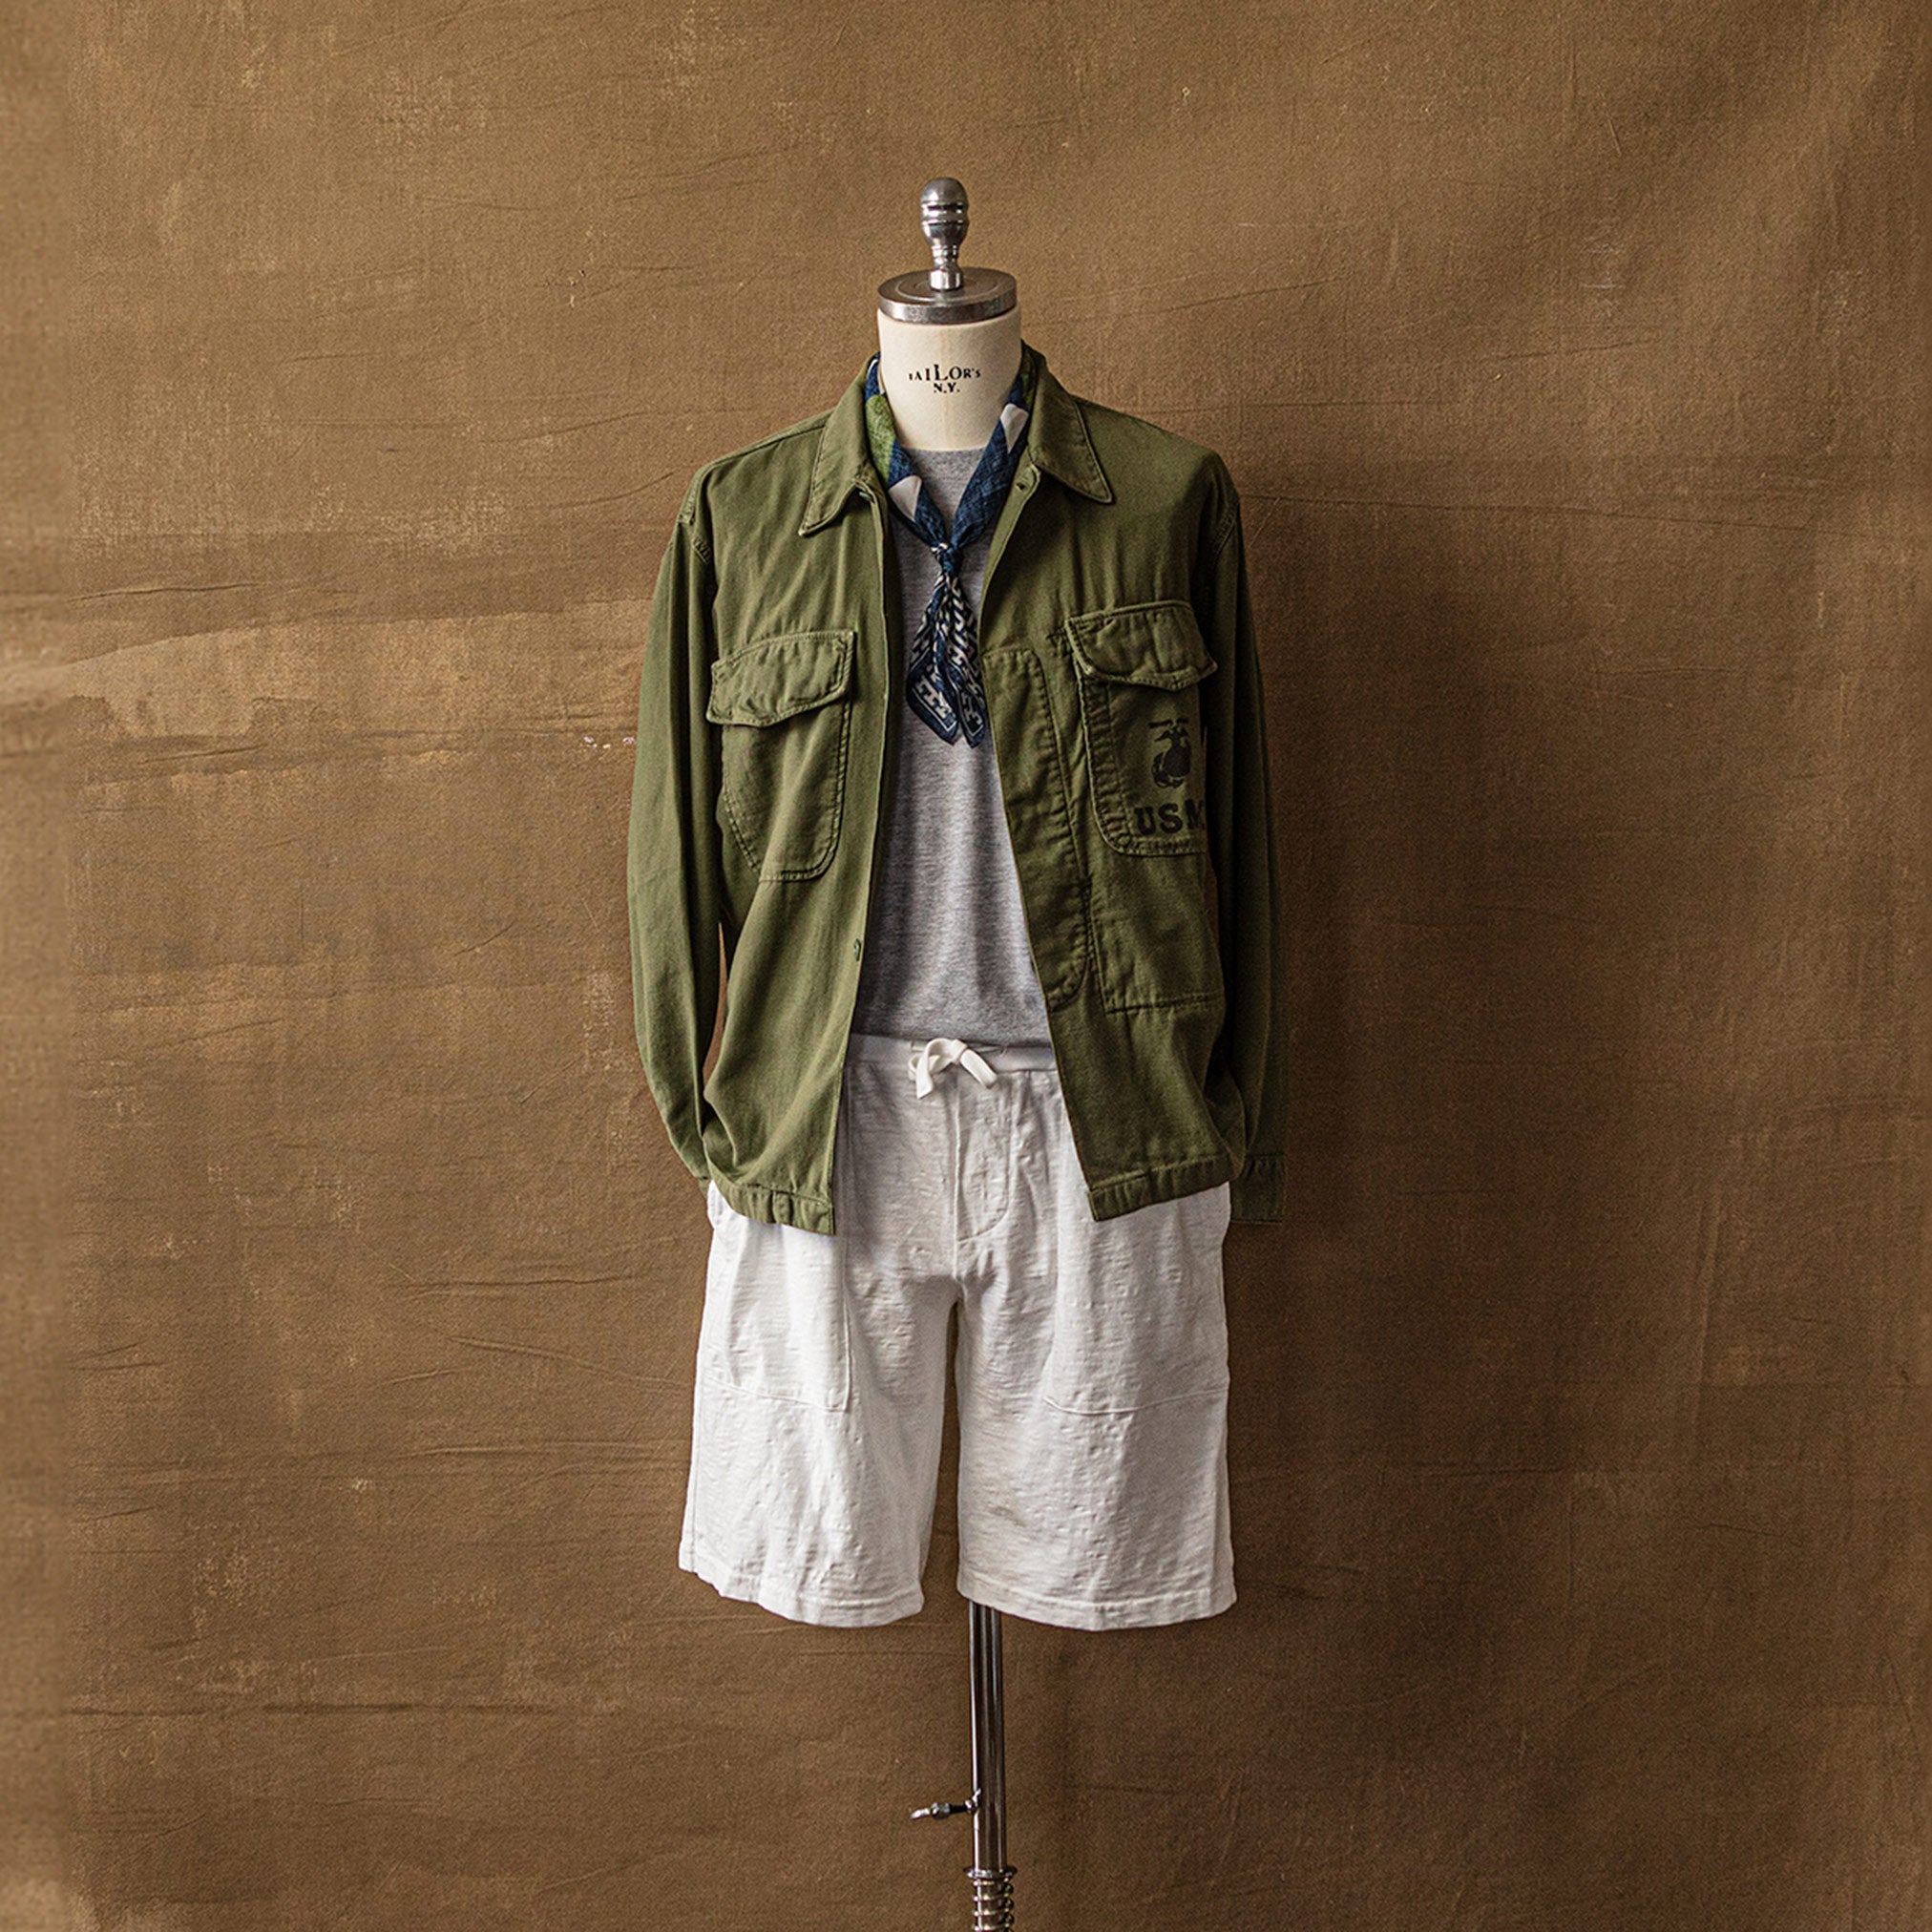 P56 Jacket in Military Green